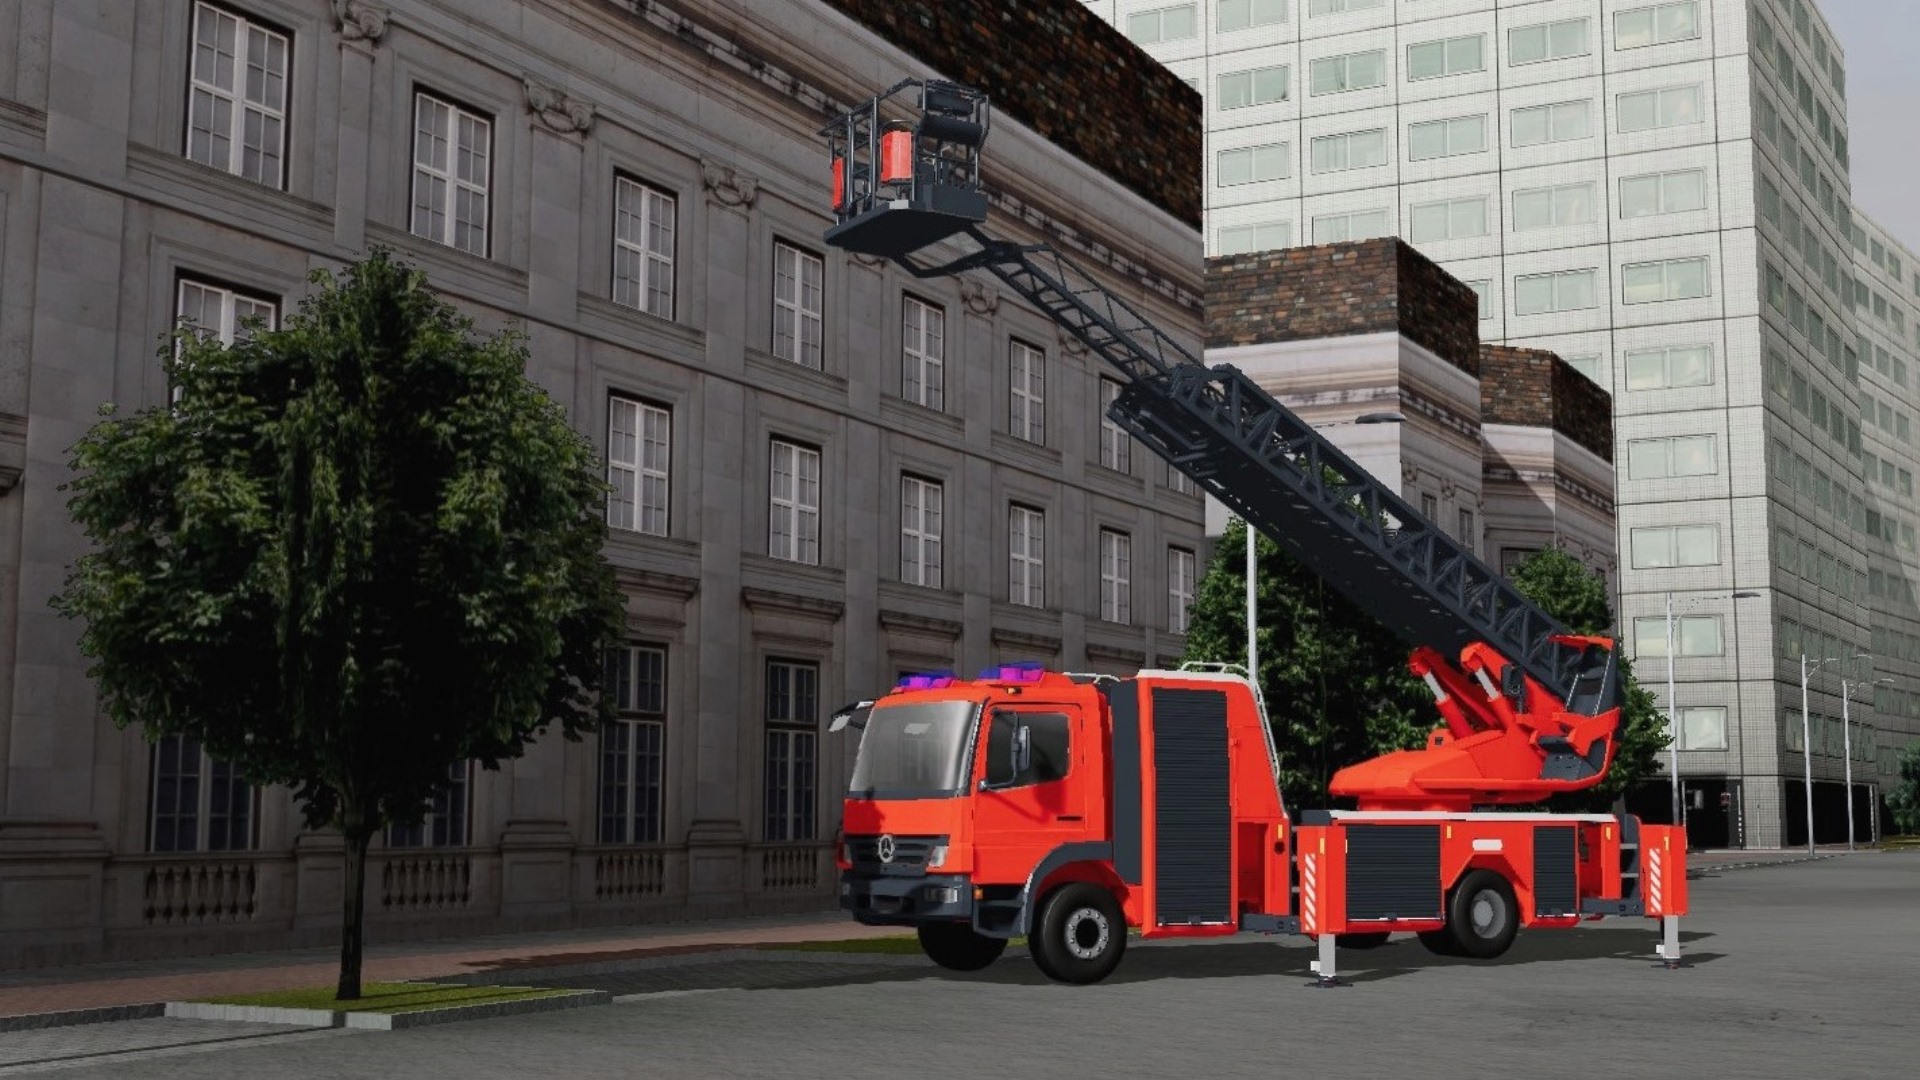 A fully functional Aerial Ladder Truck for training aerial ladder operations in a safe and repeatable environment.